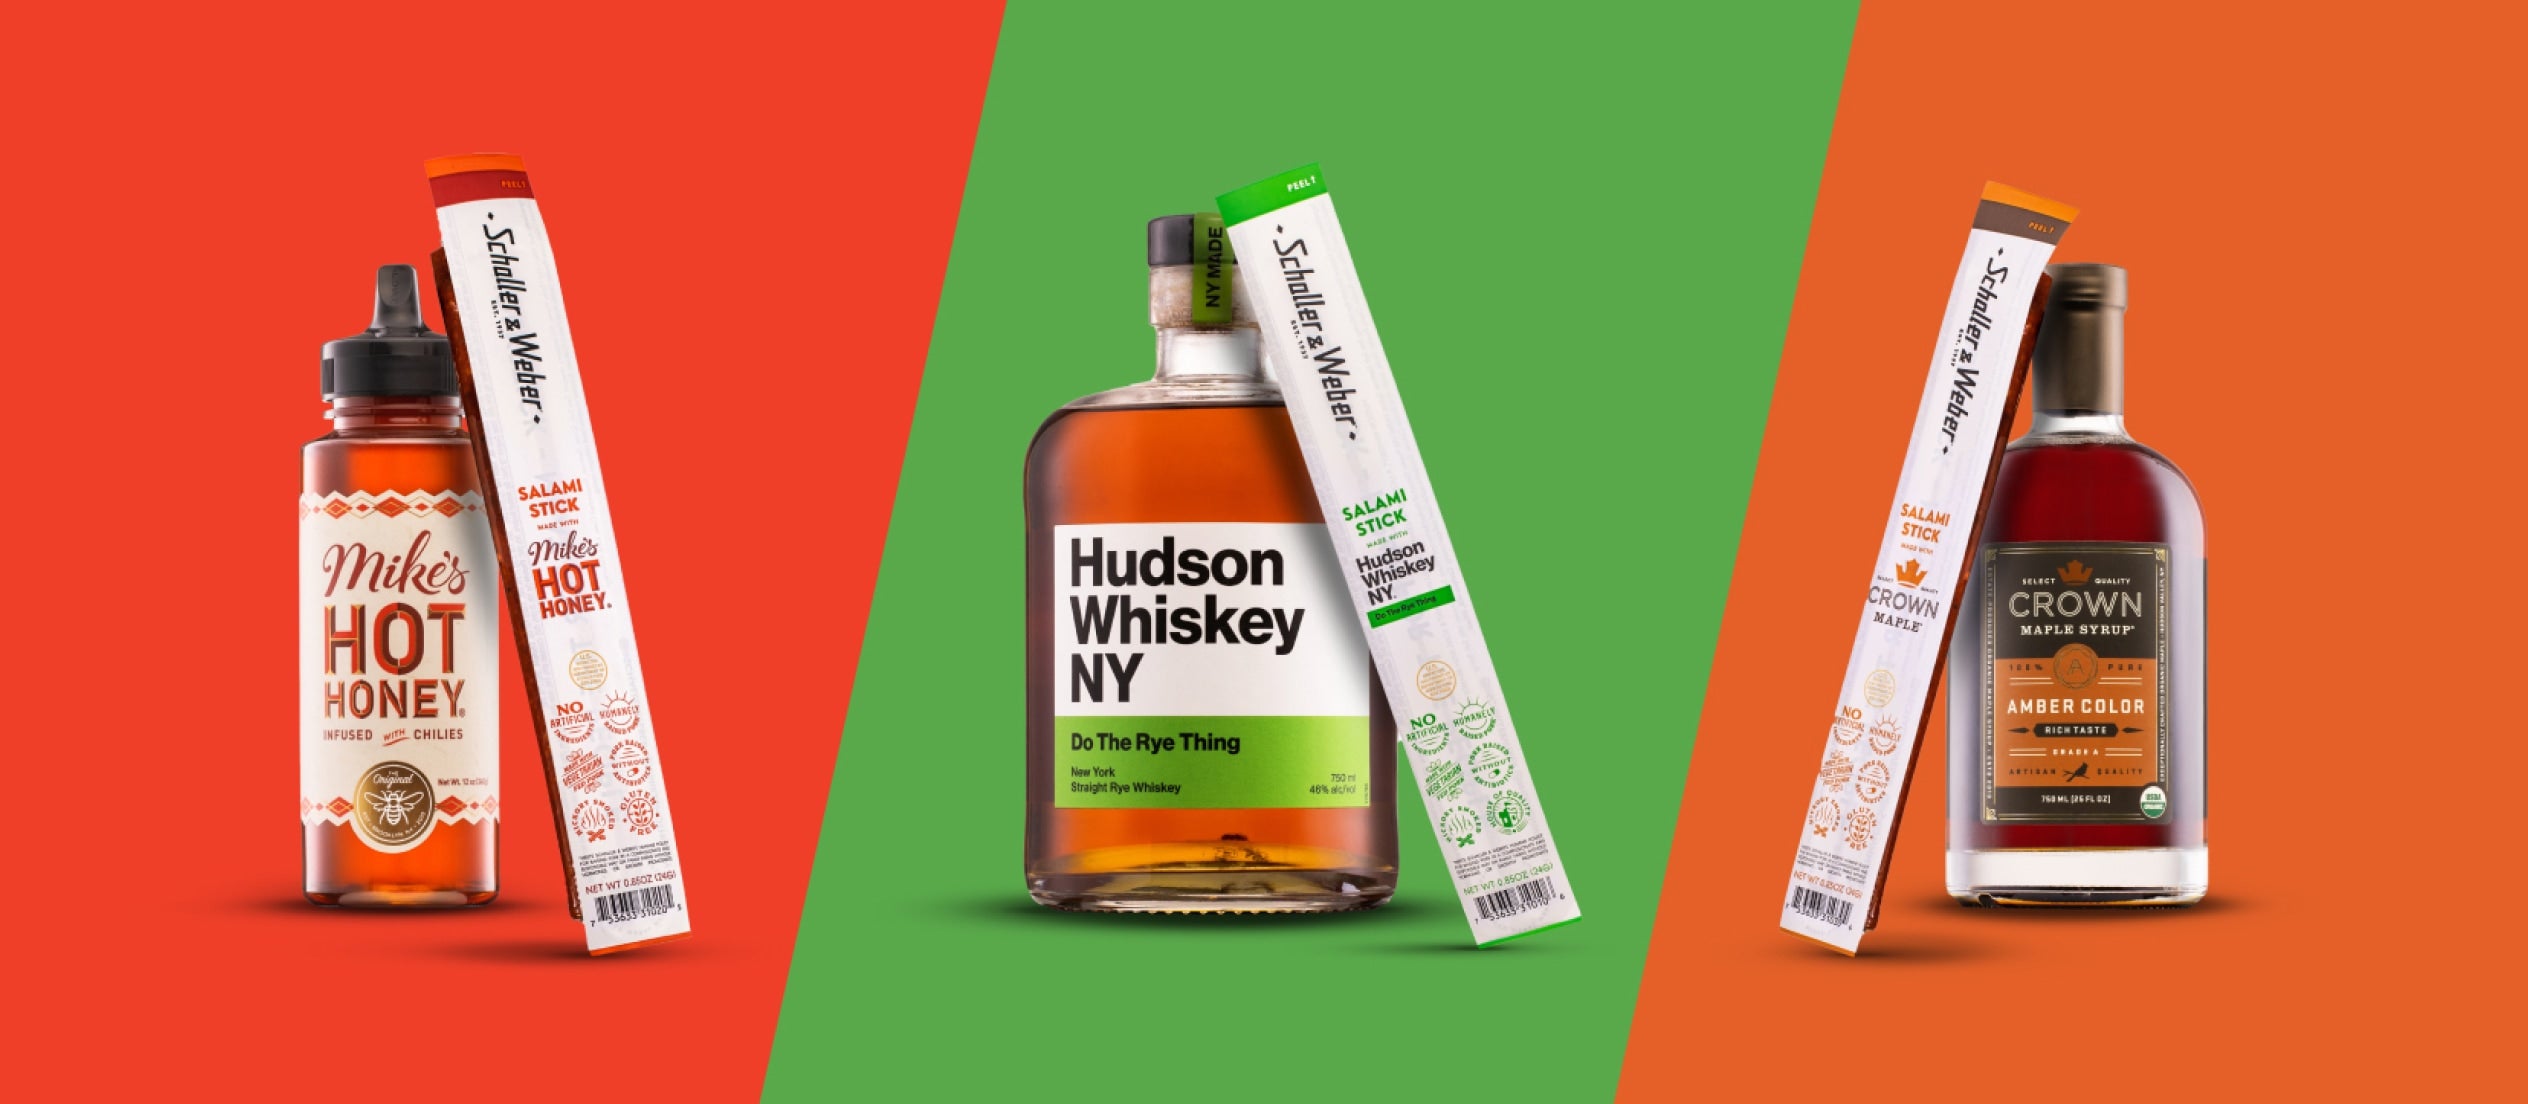 Mike's Hot Honey, Hudson Whiskey NY, and Crown Maple flavored salami sticks